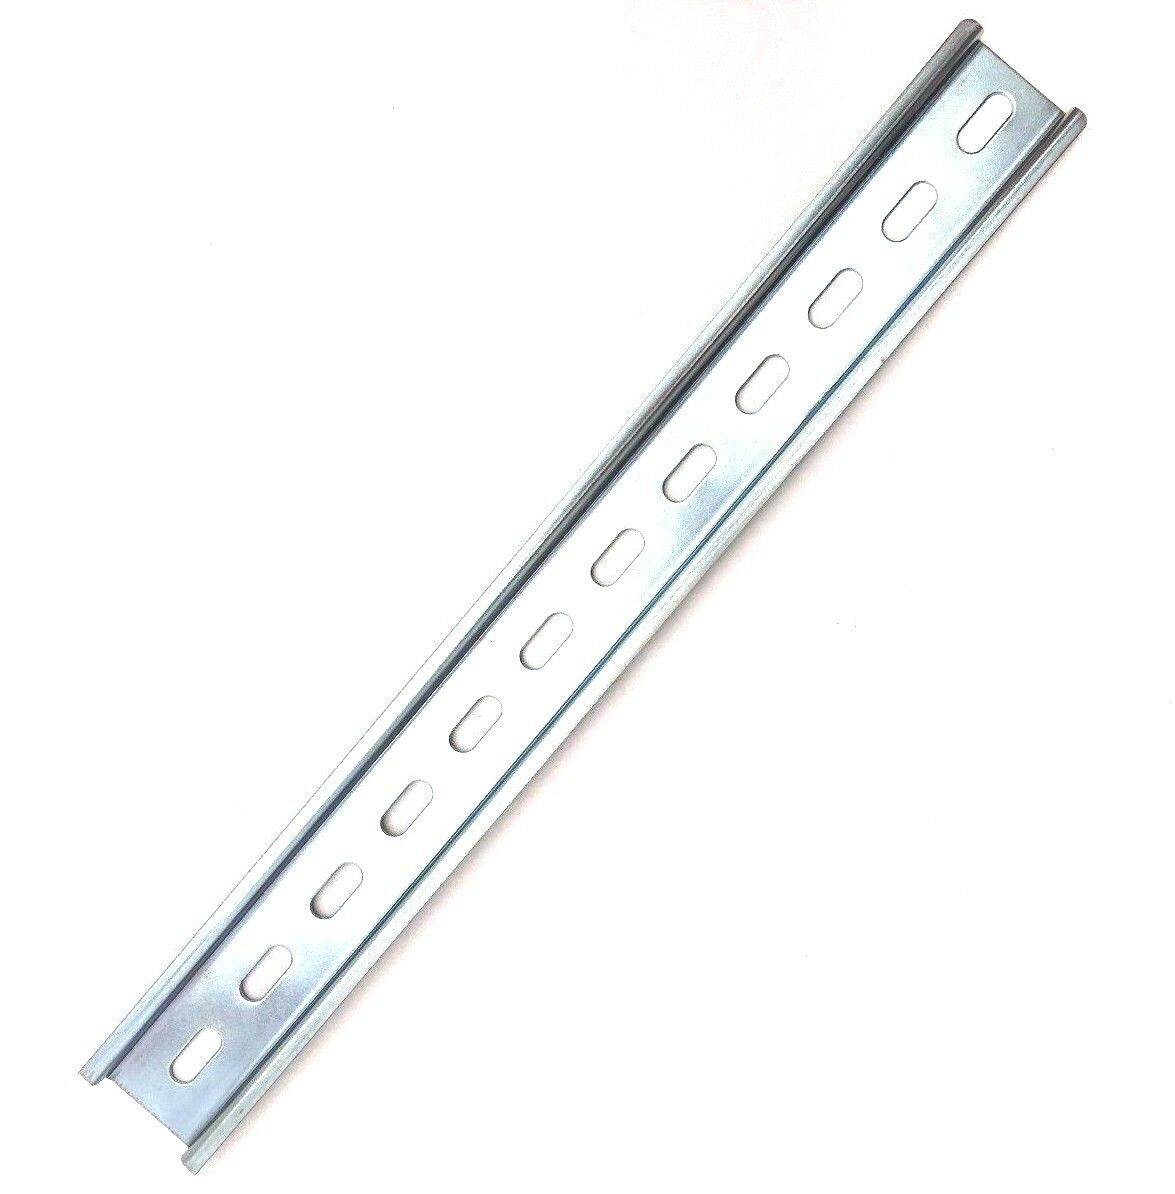 1 Piece Din Rail Slotted Zinc Plated Steel Rohs 12" Inches Long 35mm 7.5mm T&g